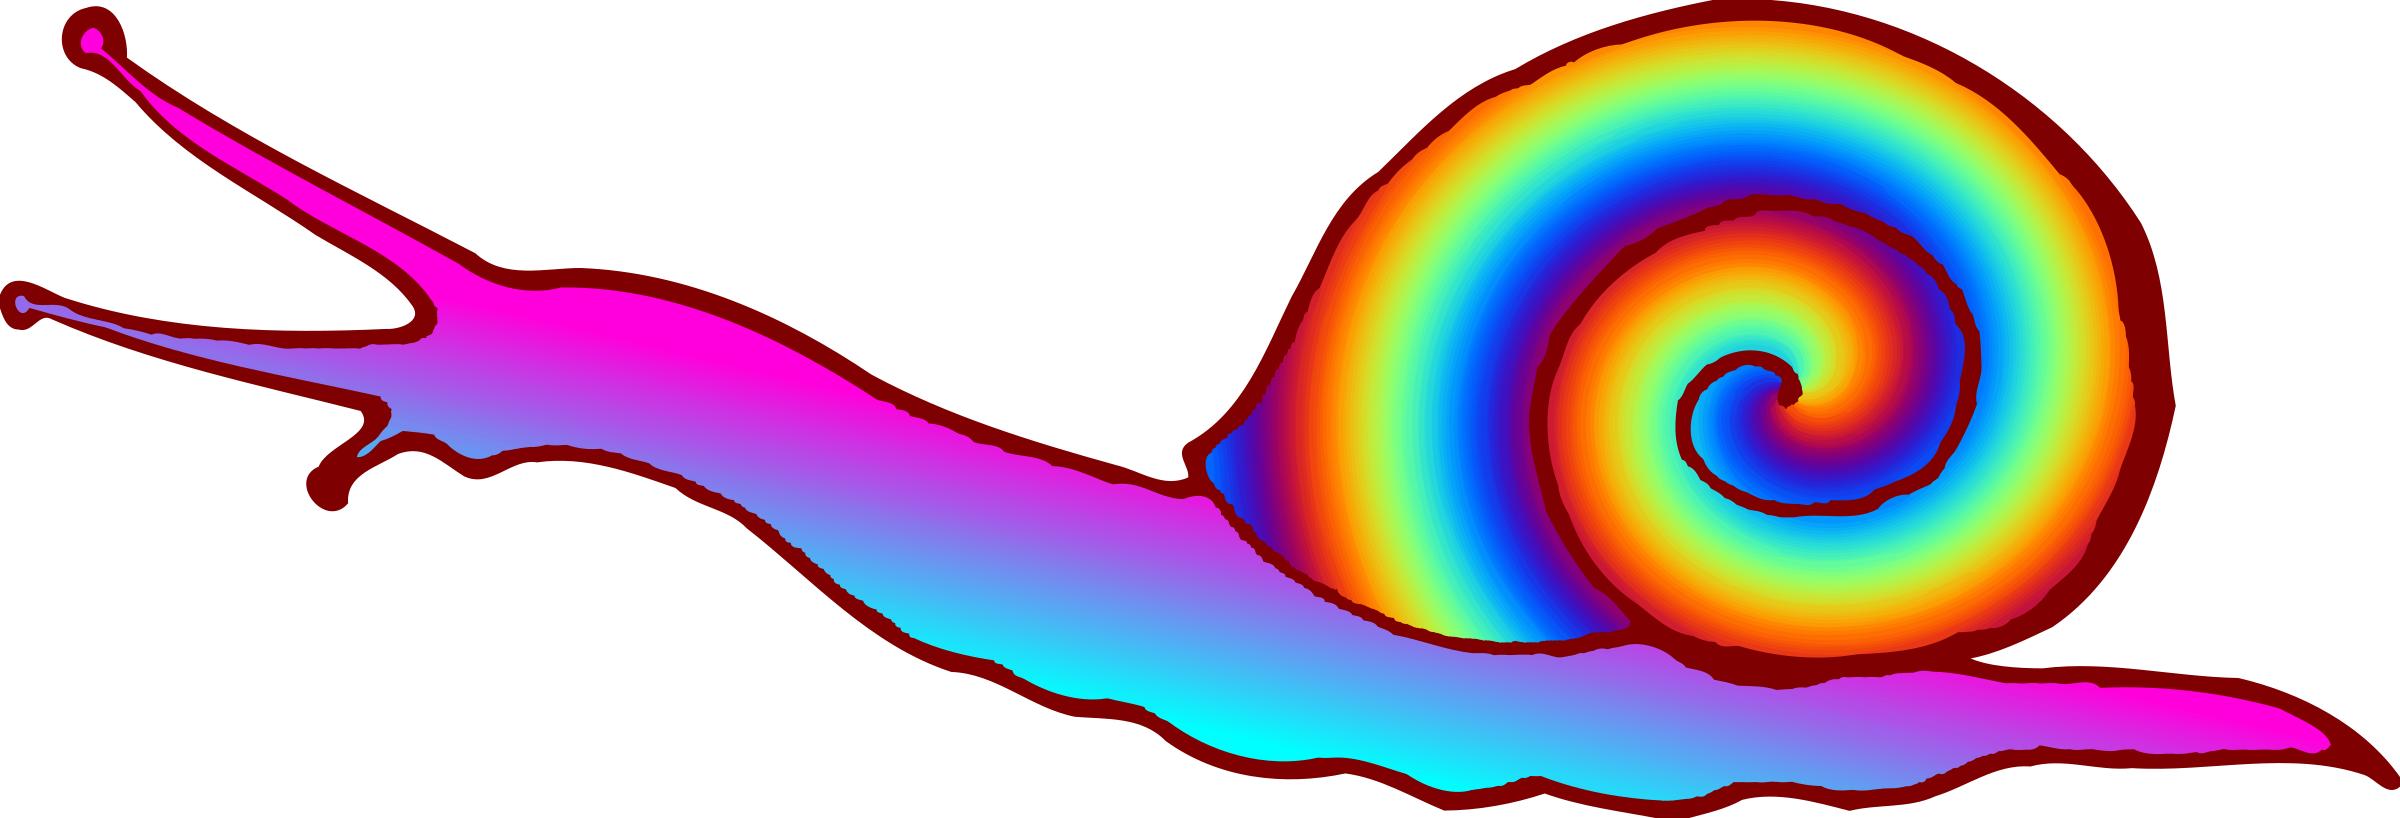 Colourful snail png